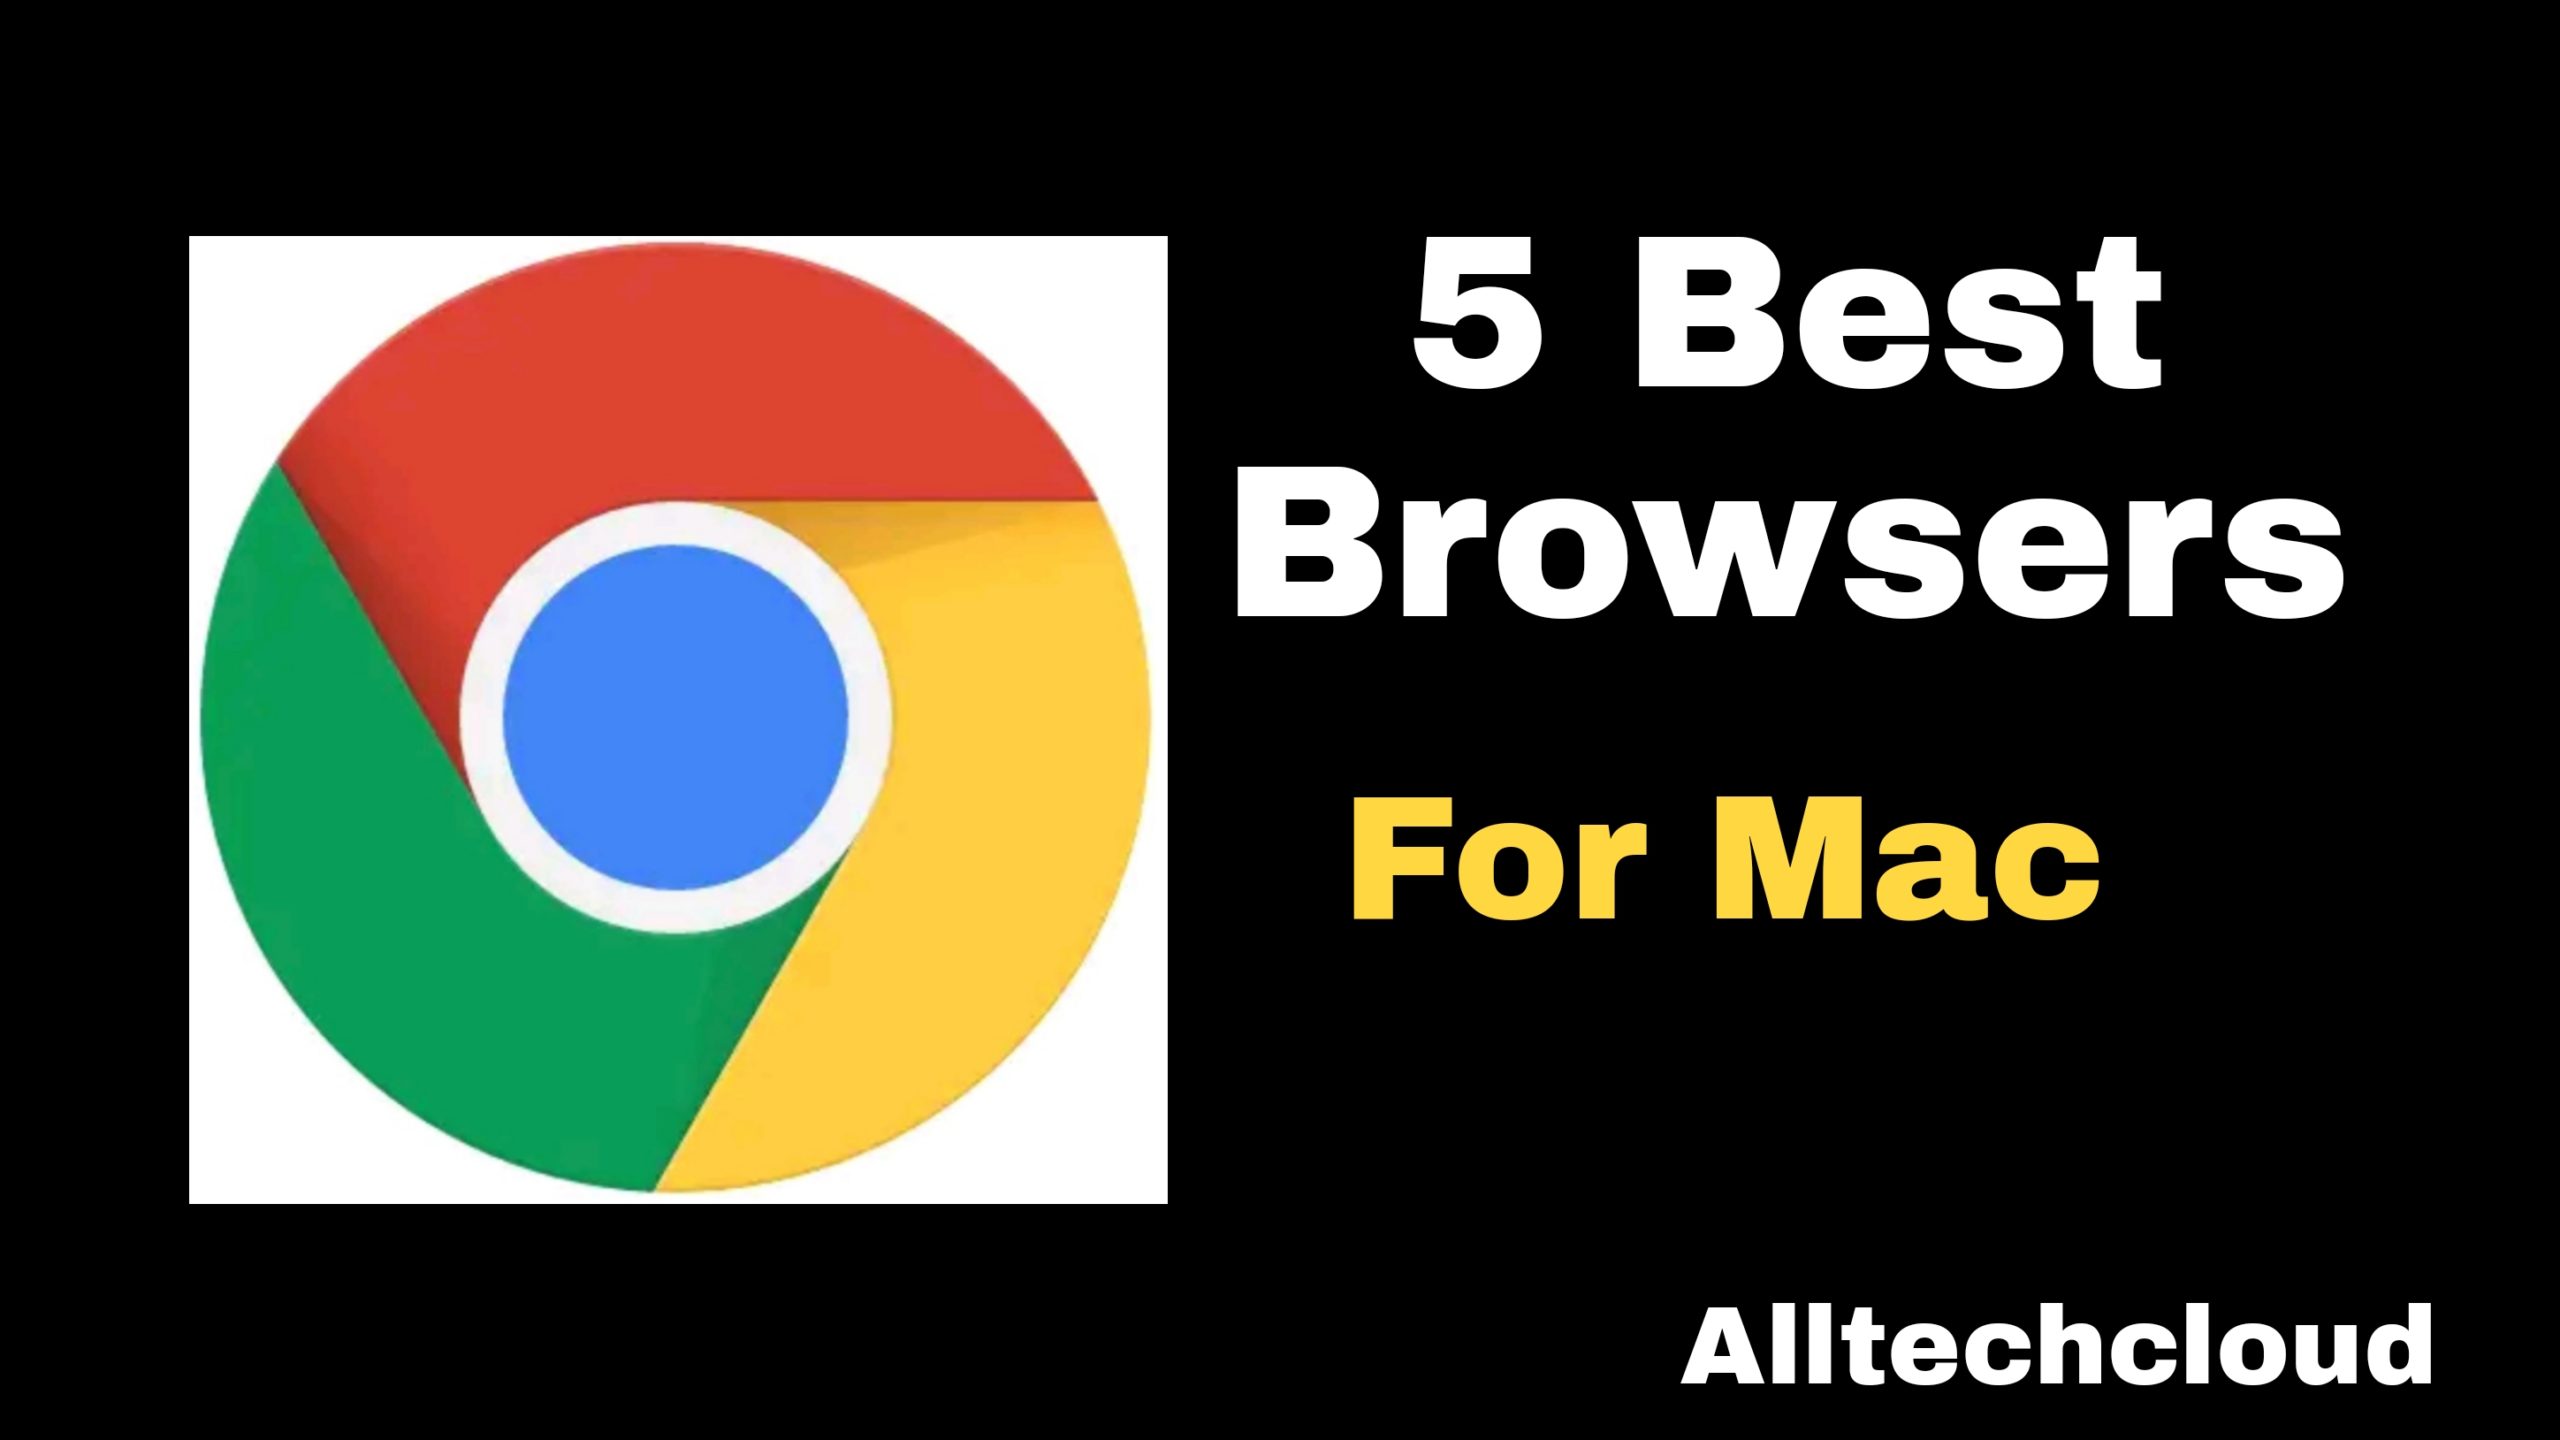 best web browser for mac 10.6.8